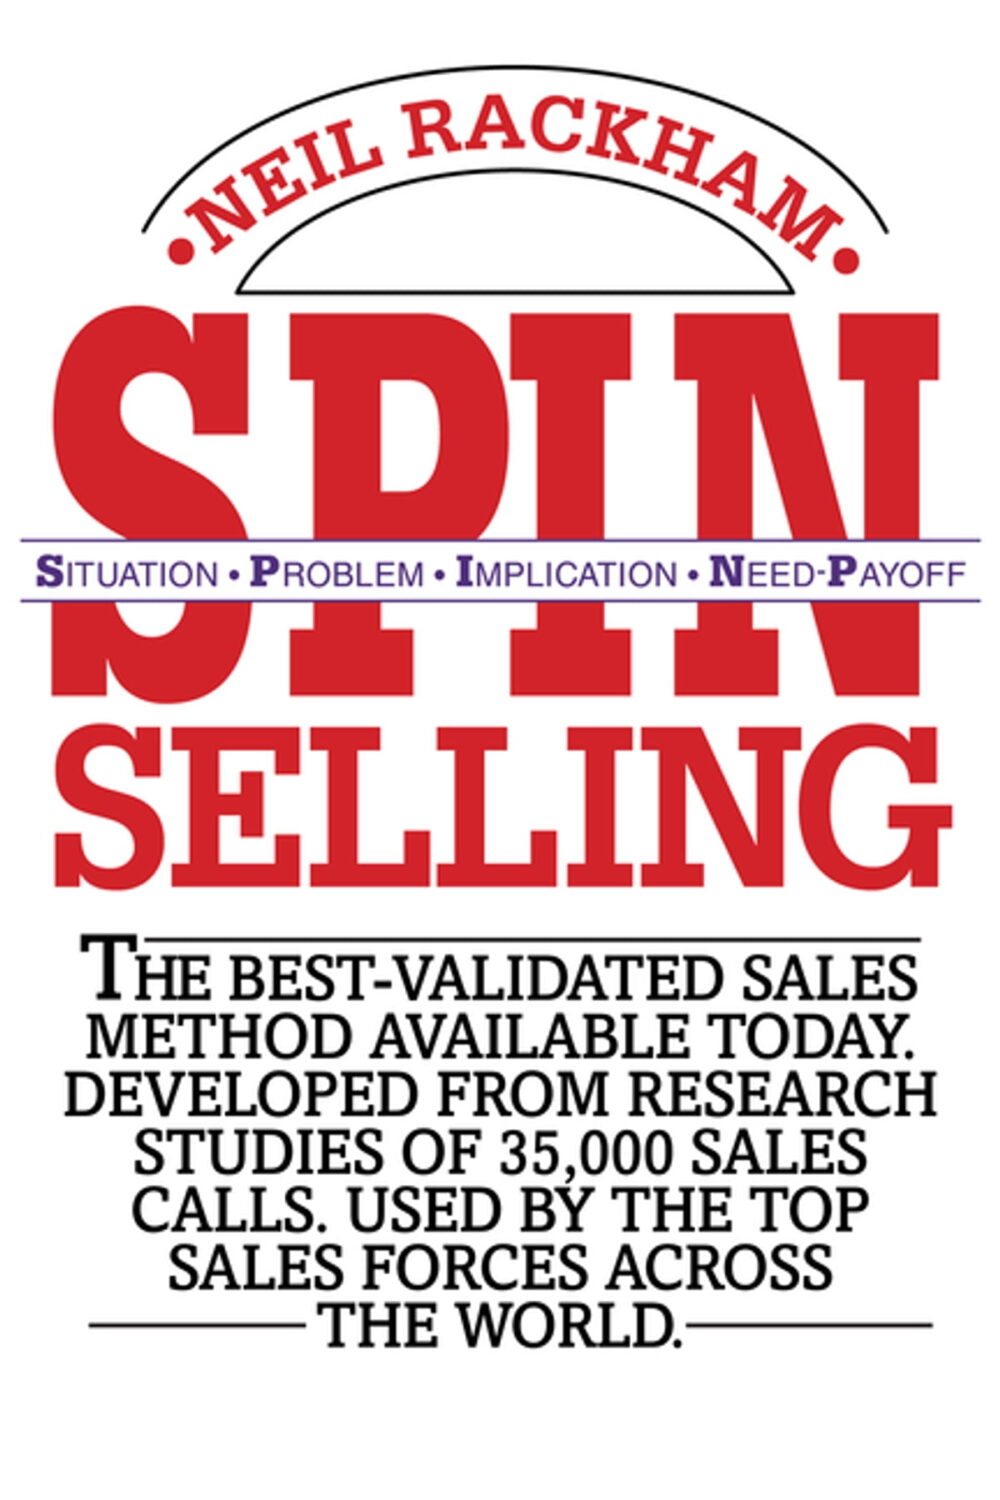 Logo de la startup SPIN Selling: Situation Problem Implication Need-payoff